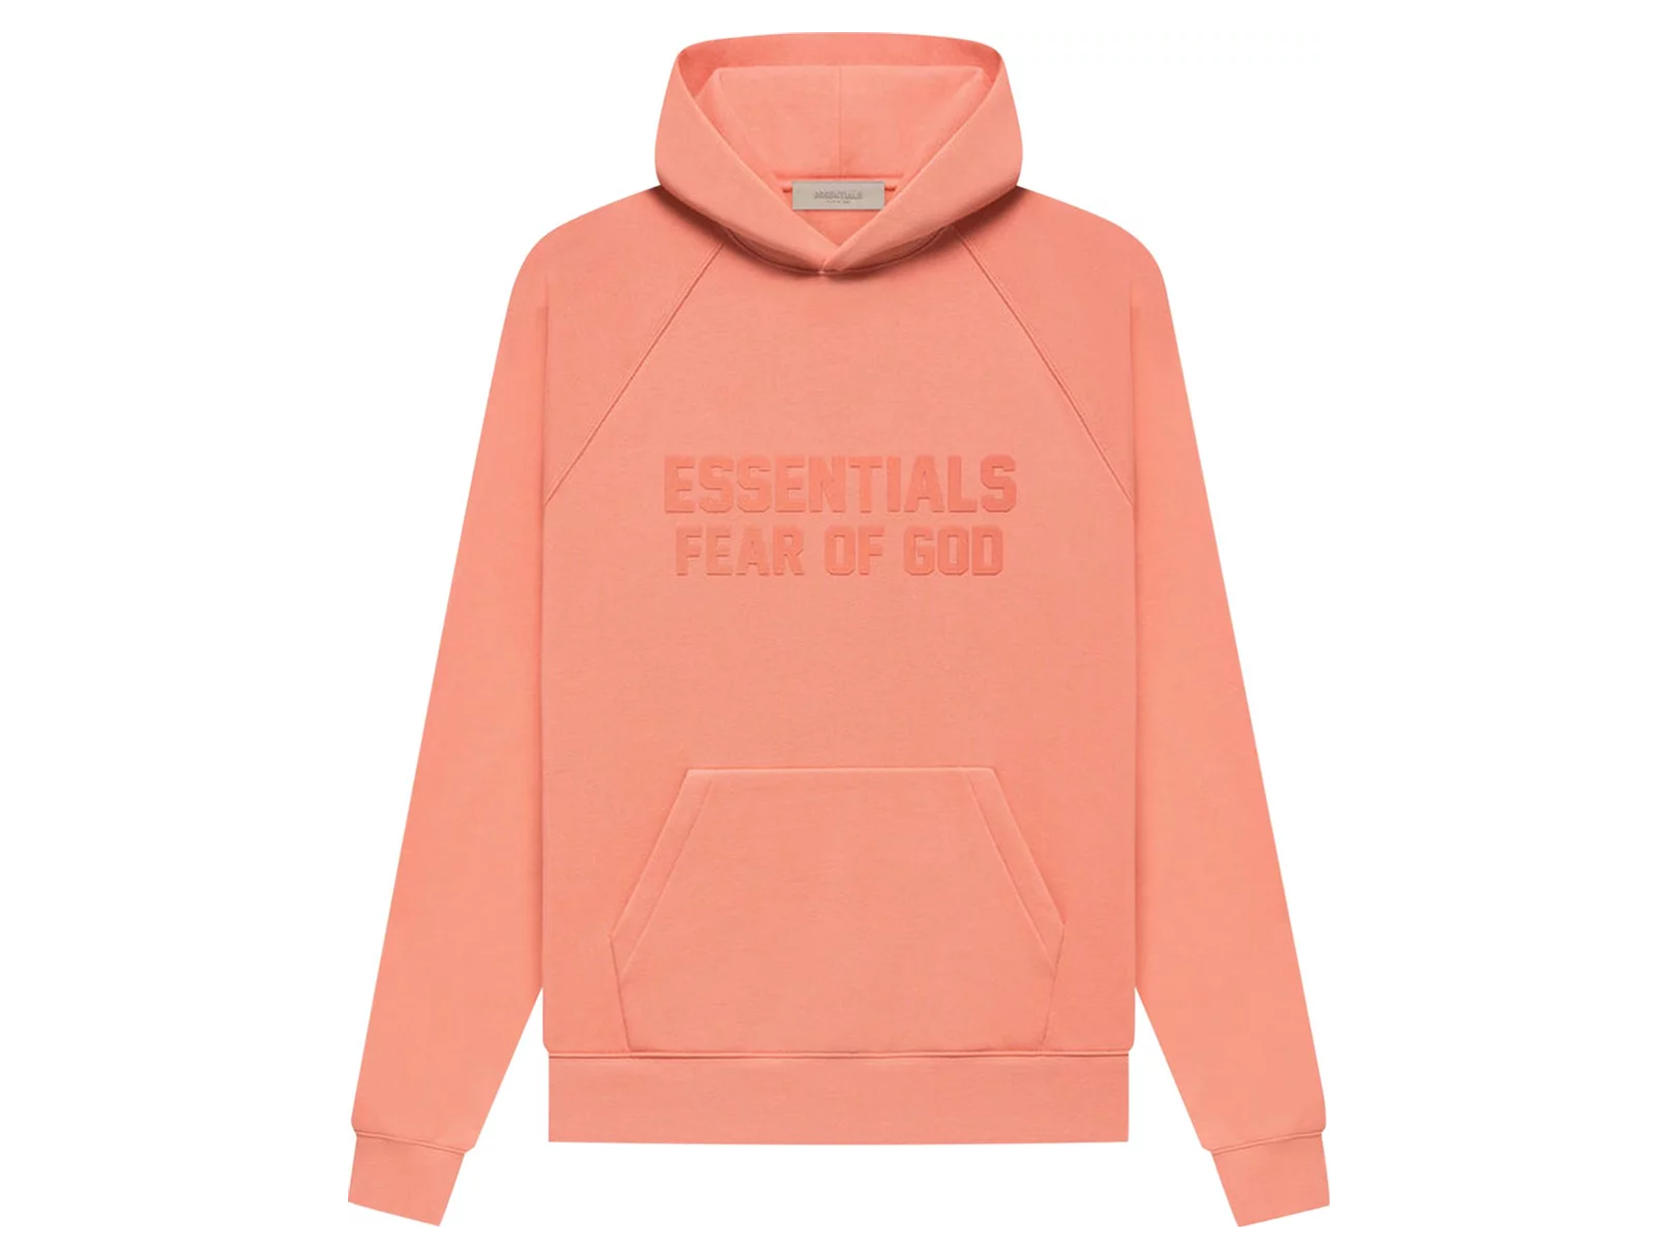 Double Boxed hoodie 169.99 FEAR OF GOD ESSENTIALS SS22 PULLOVER HOODIE CORAL PINK Double Boxed